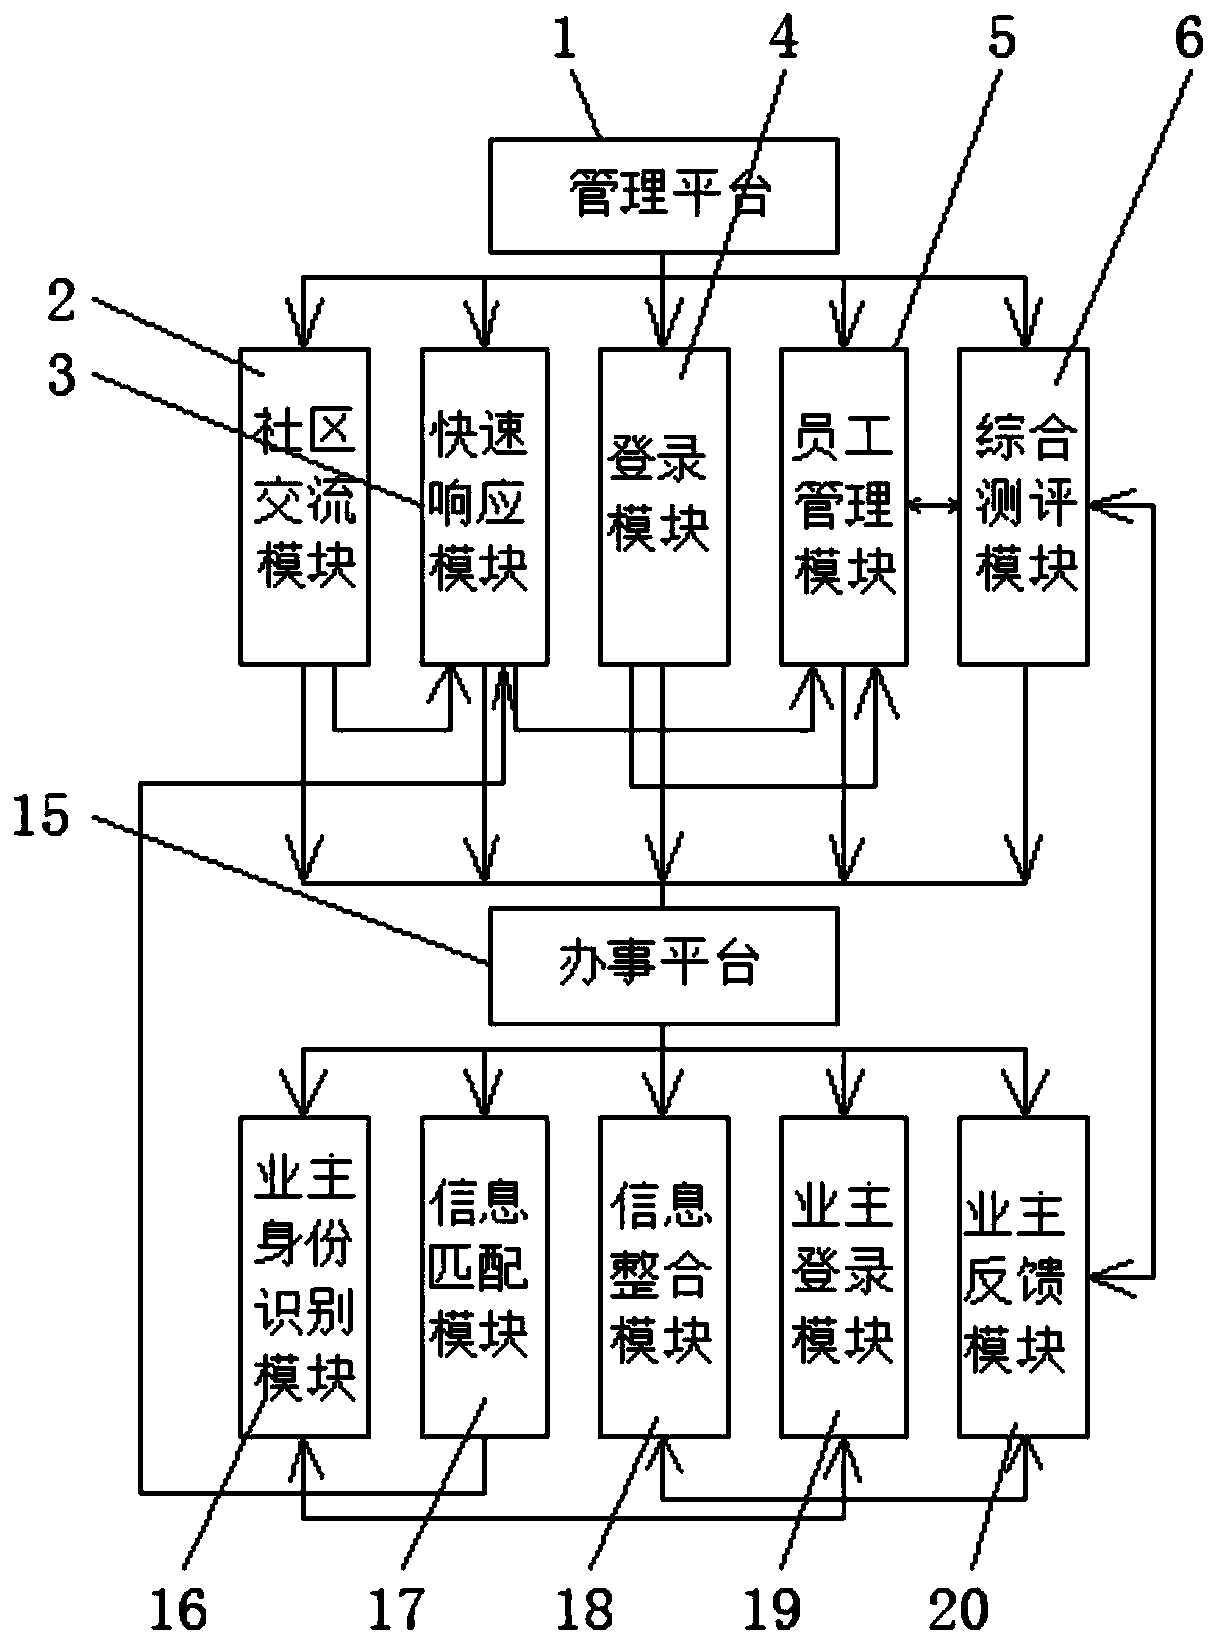 Cloud property staff intelligent matching and distributing system